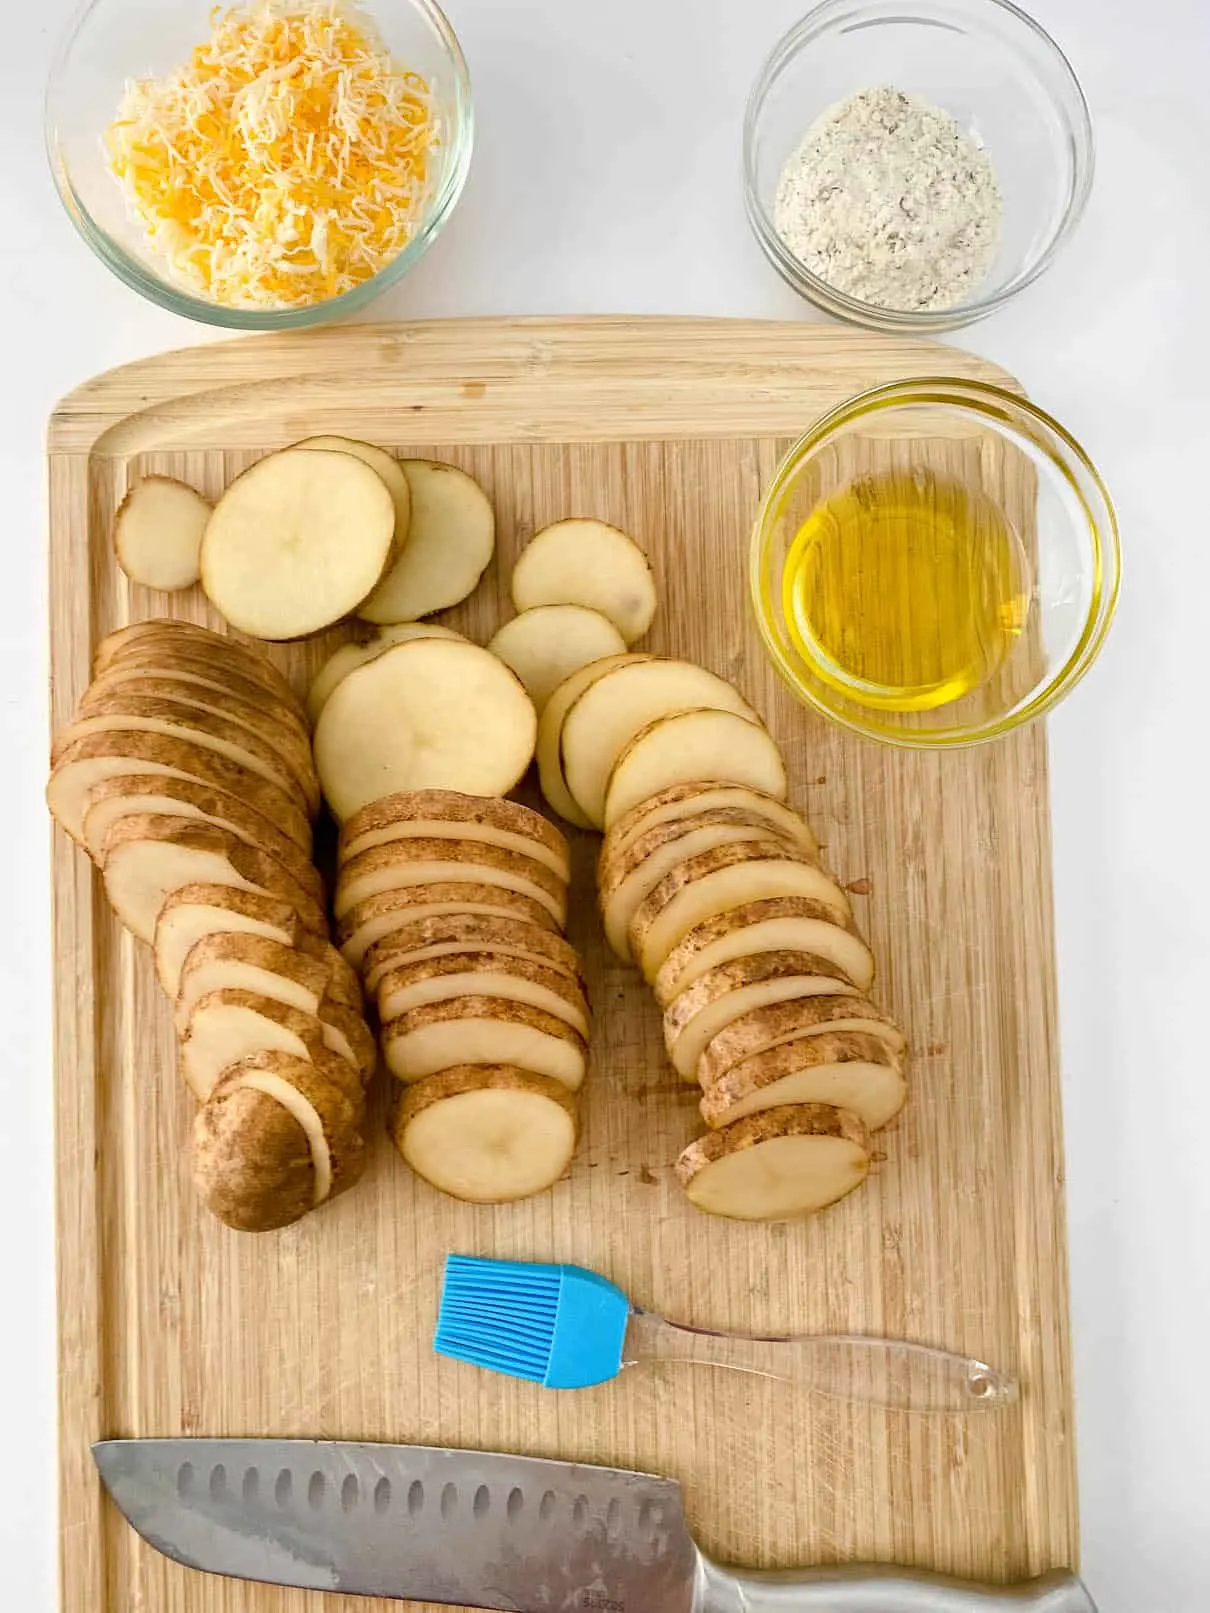 Cutting russet potatoes in thin slices, on a wooden cutting board